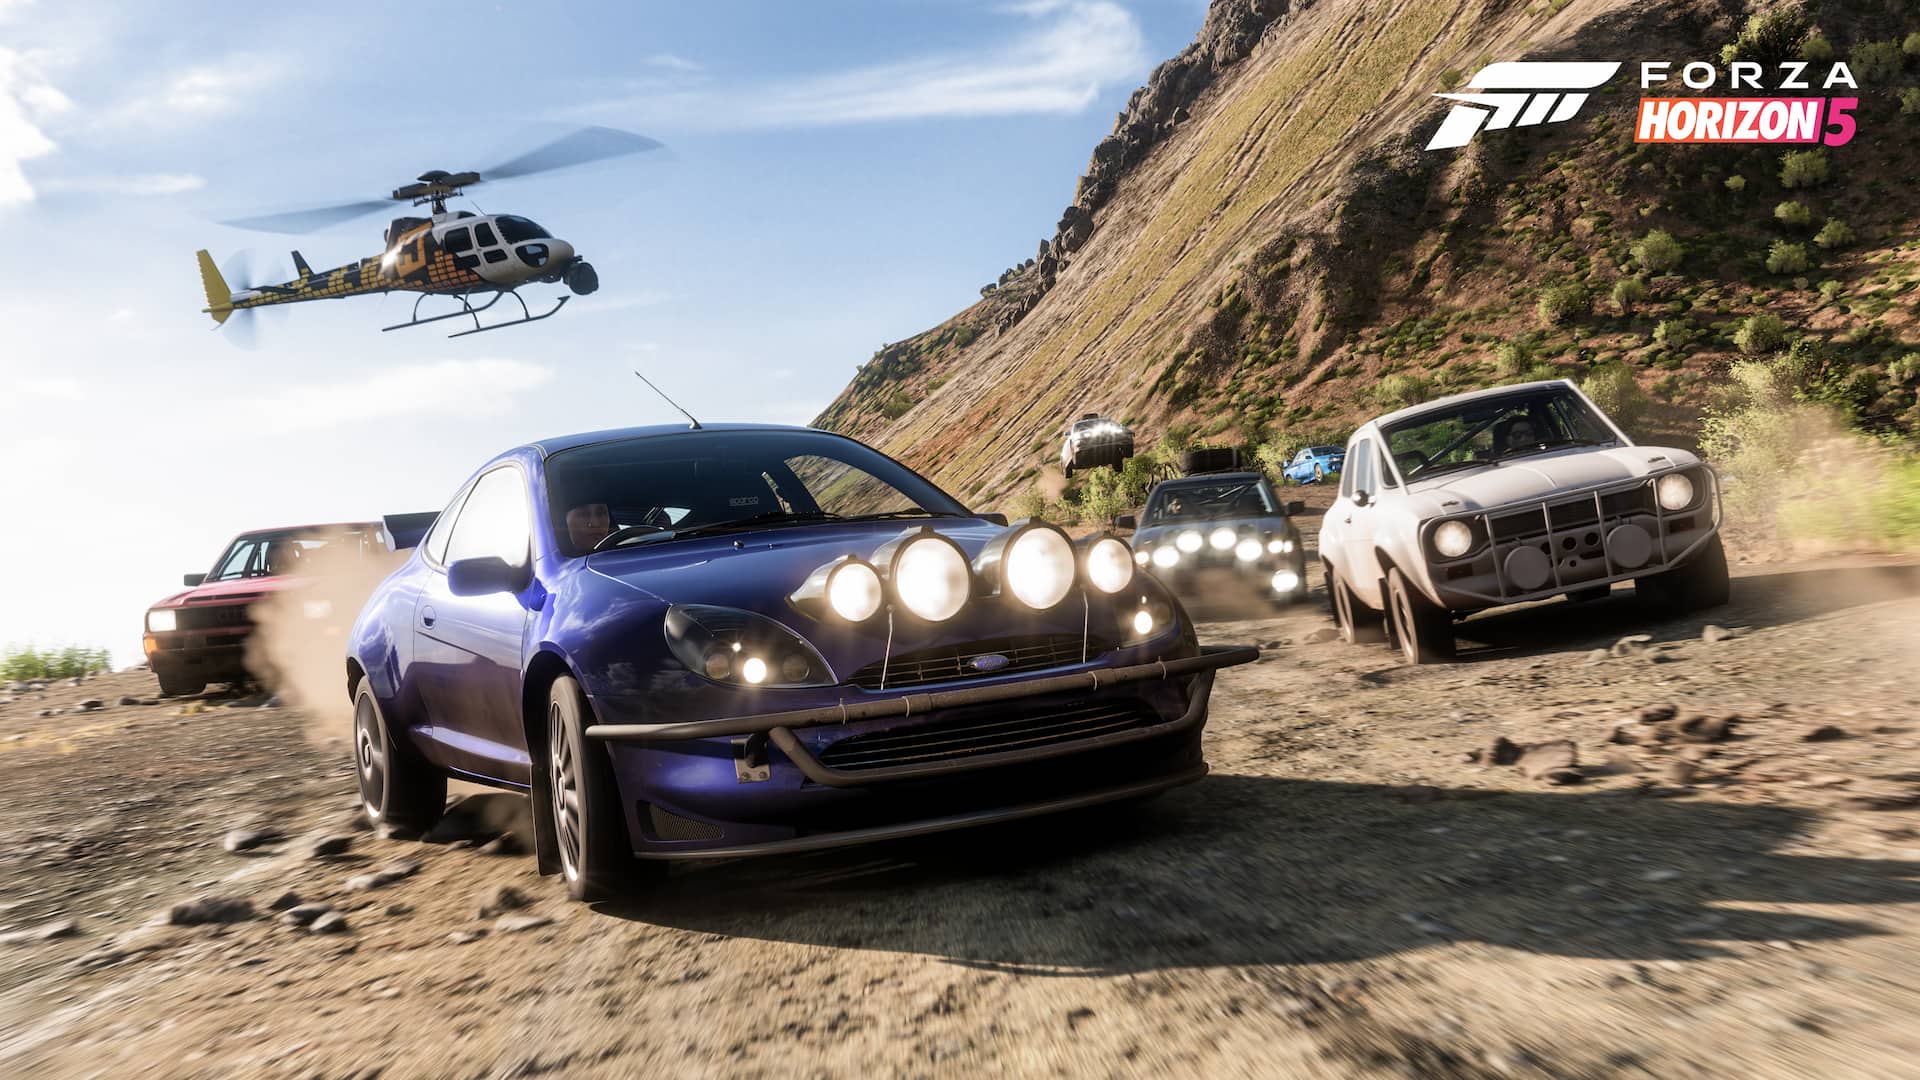 Forza Horizon 5 receives its first pre-release patch.

